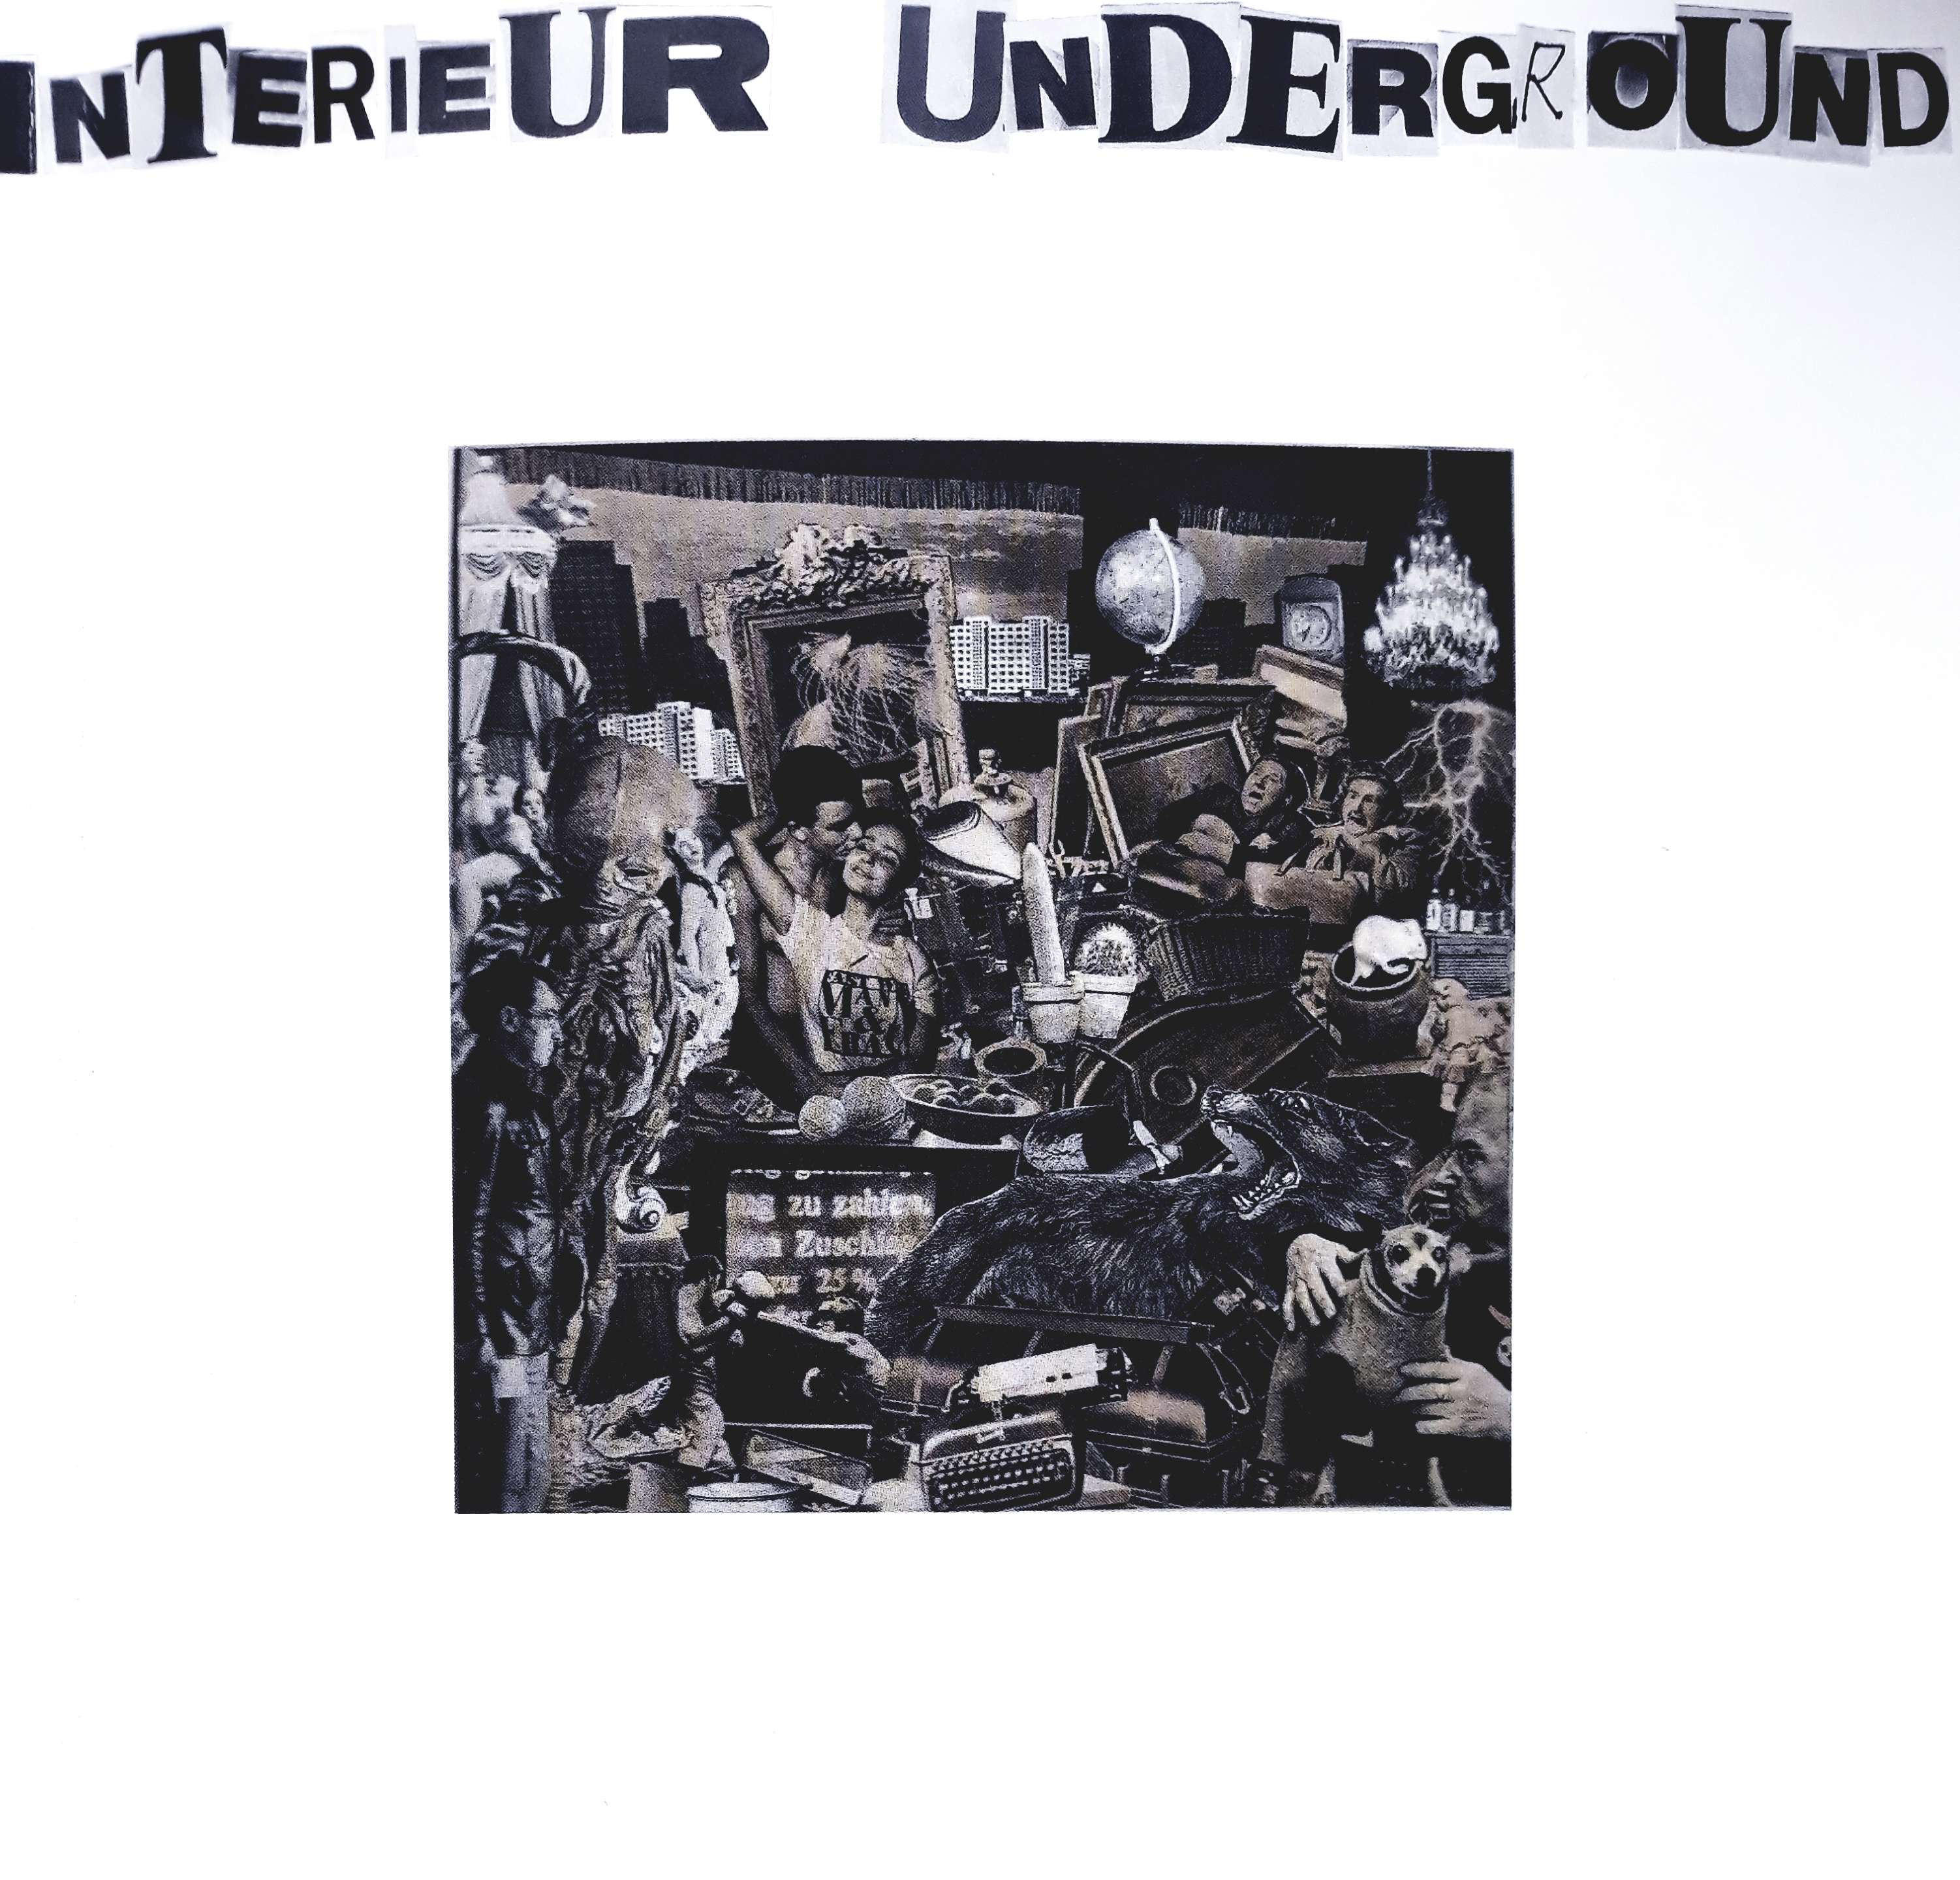 Cover Catalogue, 'Interieur Underground. '89 Geschichten der Friedlichen Revolution', supported by Federal Foundation for the Reappraisal of the SED Dictatorship, and Saxon Regional Representative for the Stasi Archives, 2017.